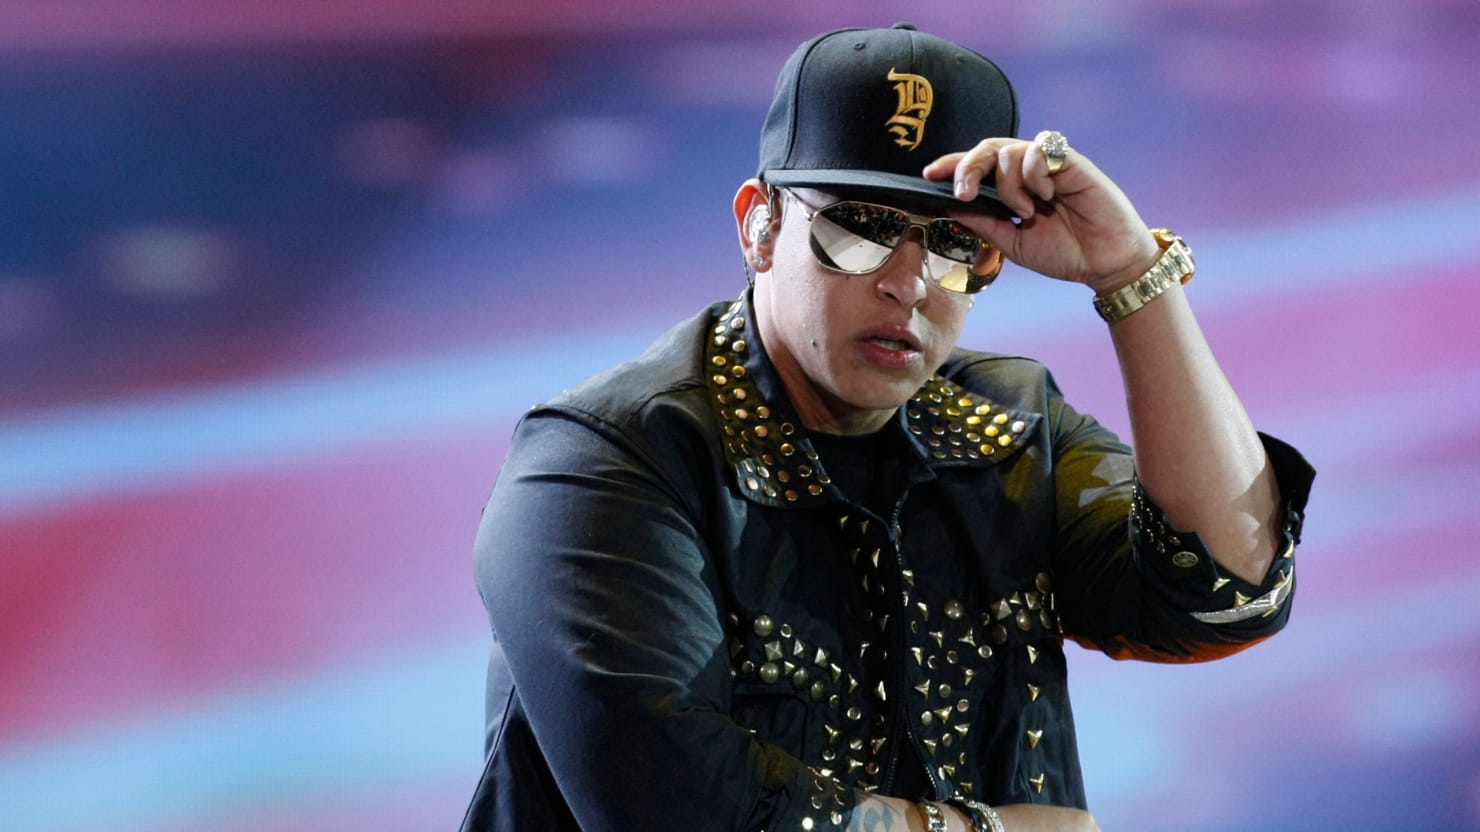 Daddy Yankee Crowned #1 Spotify Artist, First Latin Musician To Have the Title